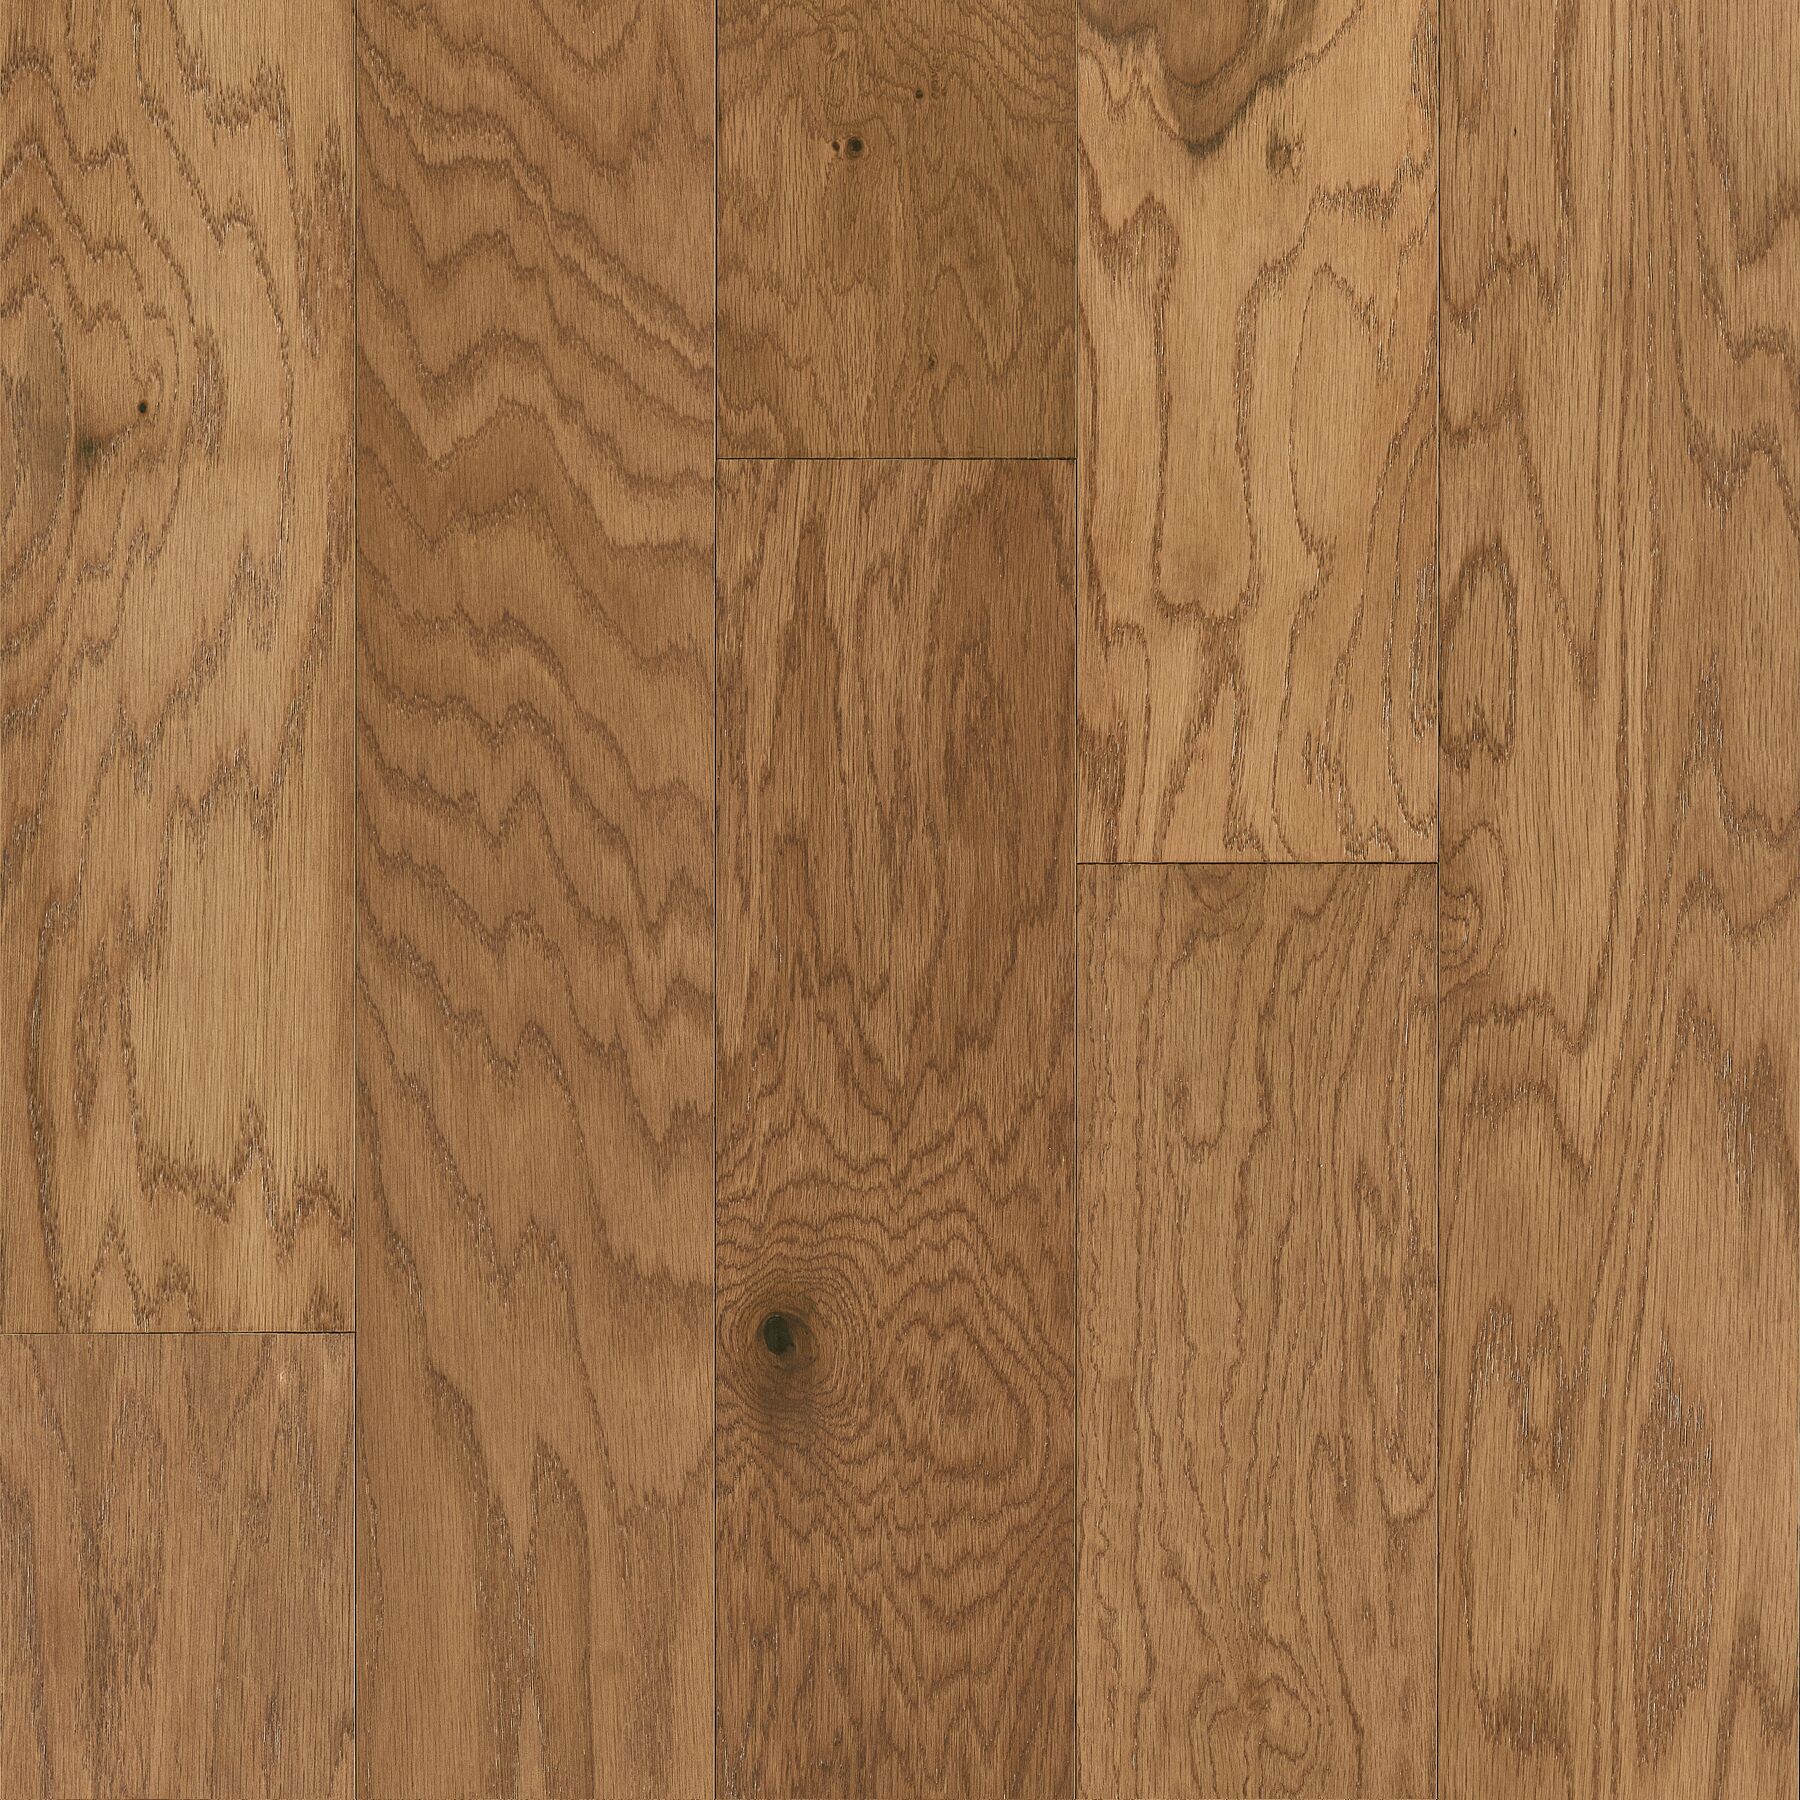 Callie Dogwood Densified Wood Flooring that's dog friendly with hardened wood